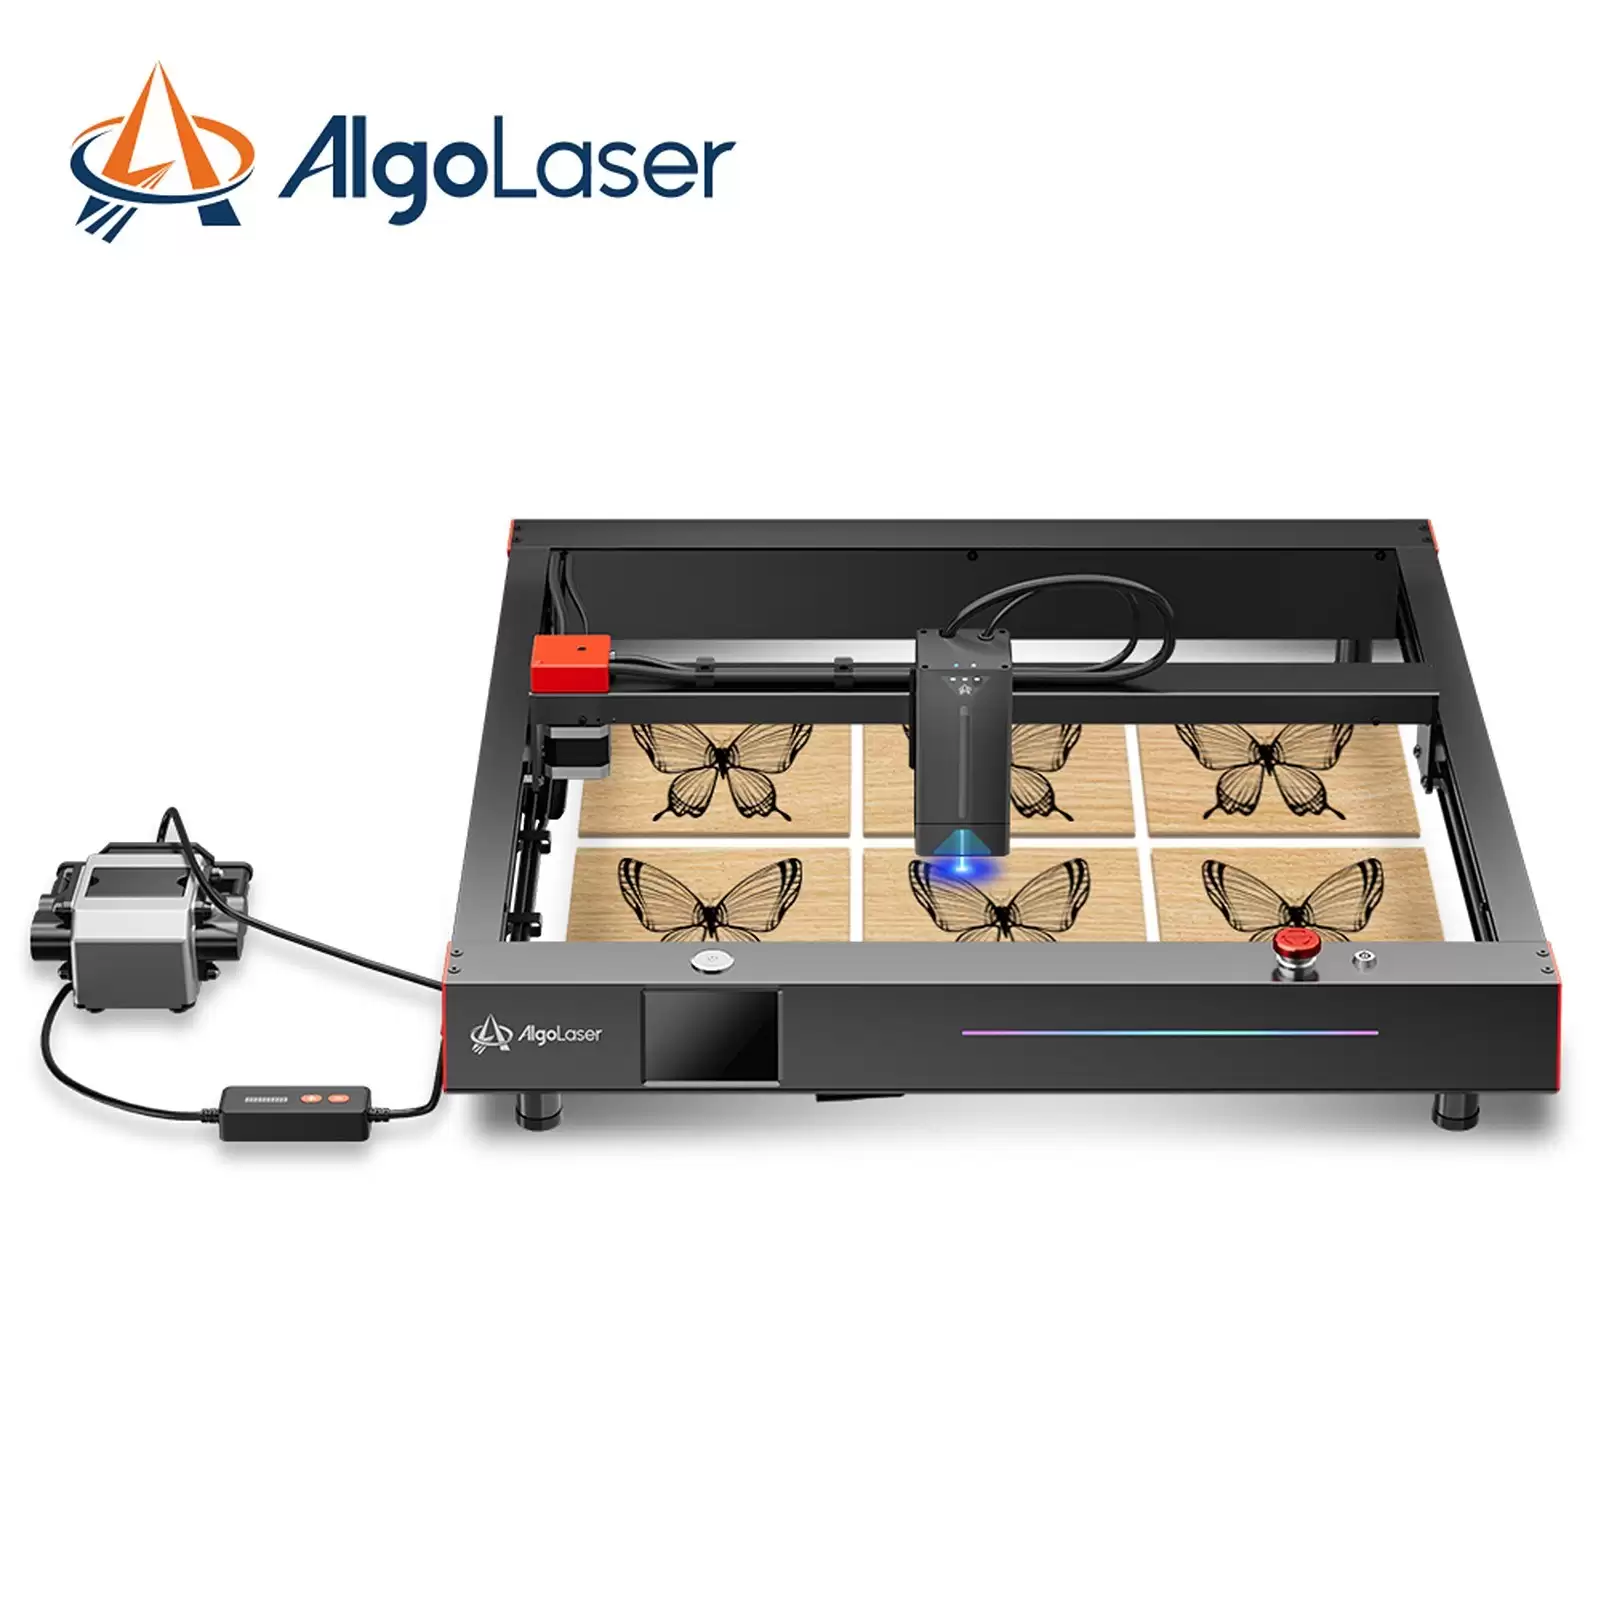 Pay Only €649 For Algolaser Delta 22w Laser Engraver With Auto Air Pump With This Discount Coupon At Cafago